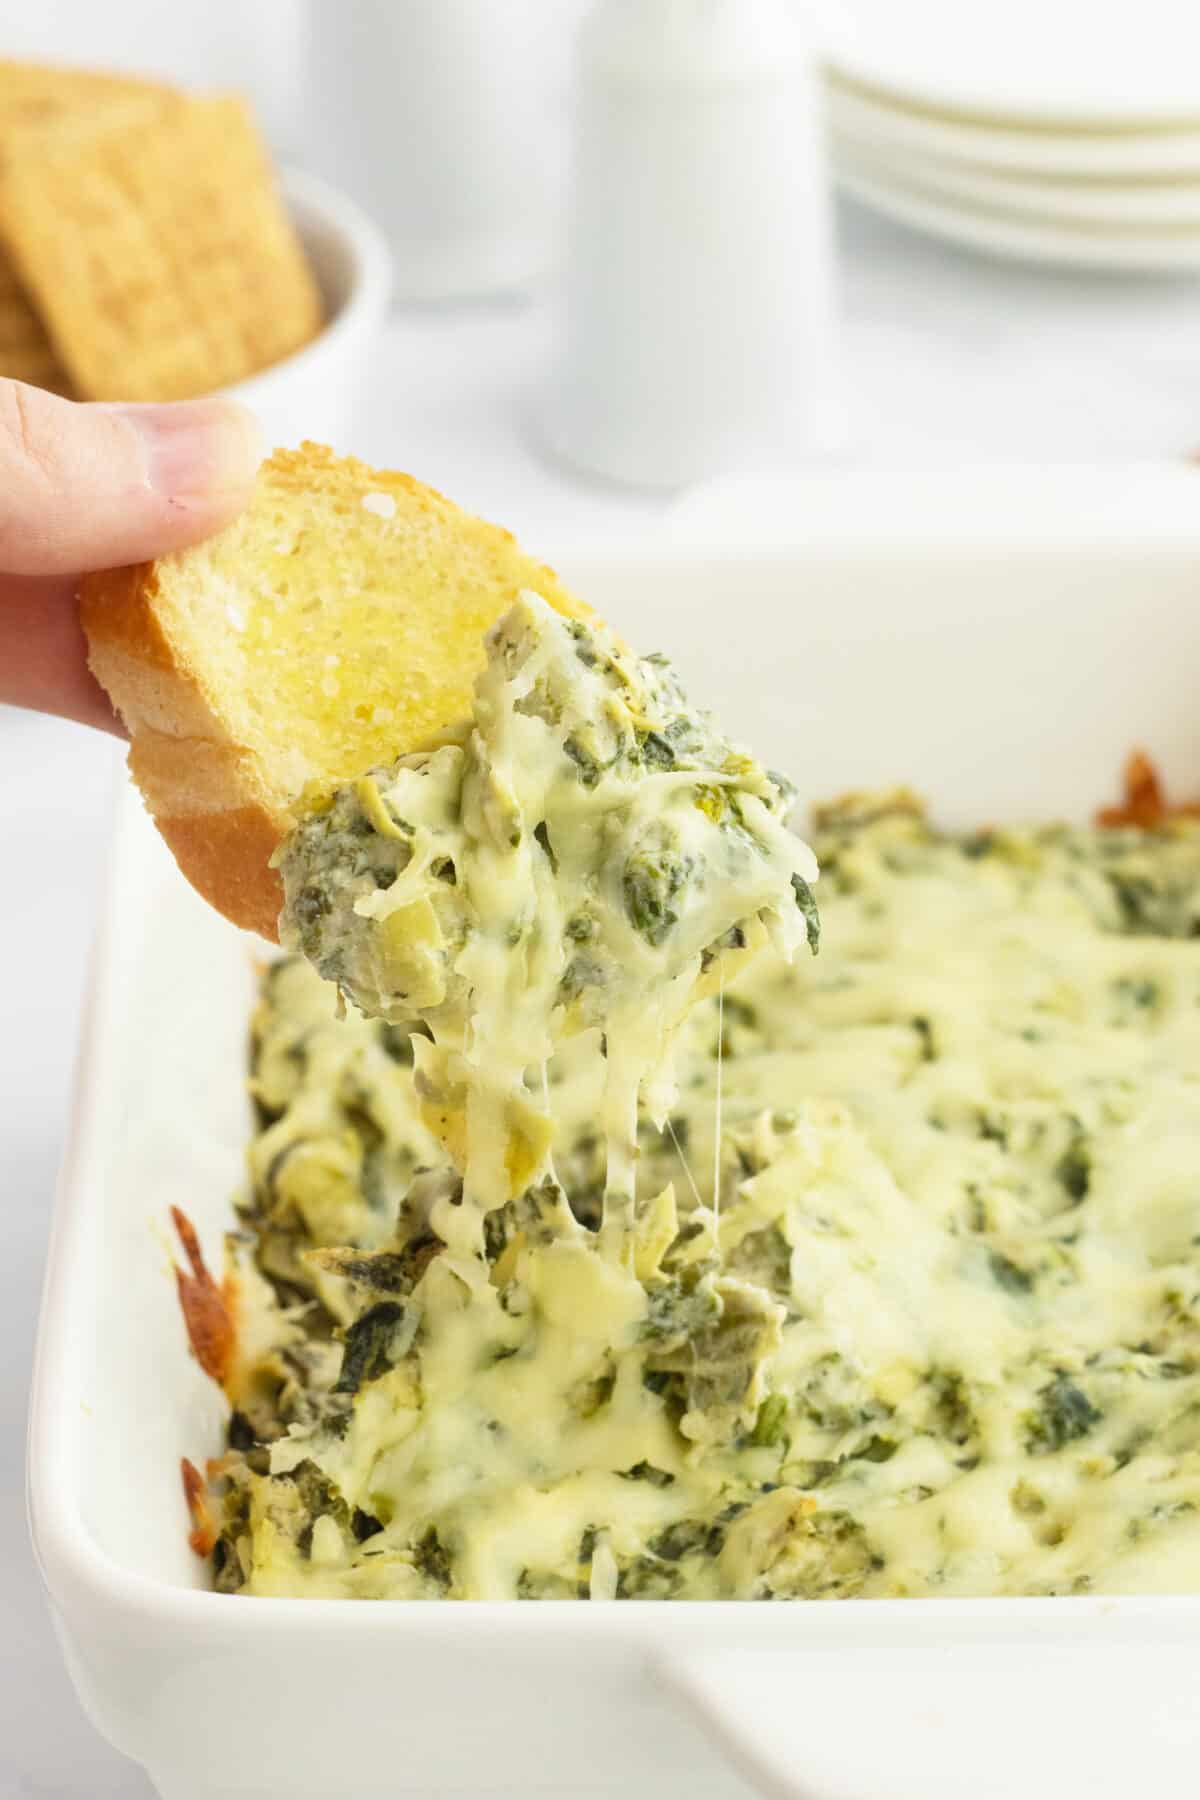 Hot and cheesy spinach and artichoke dip on bread